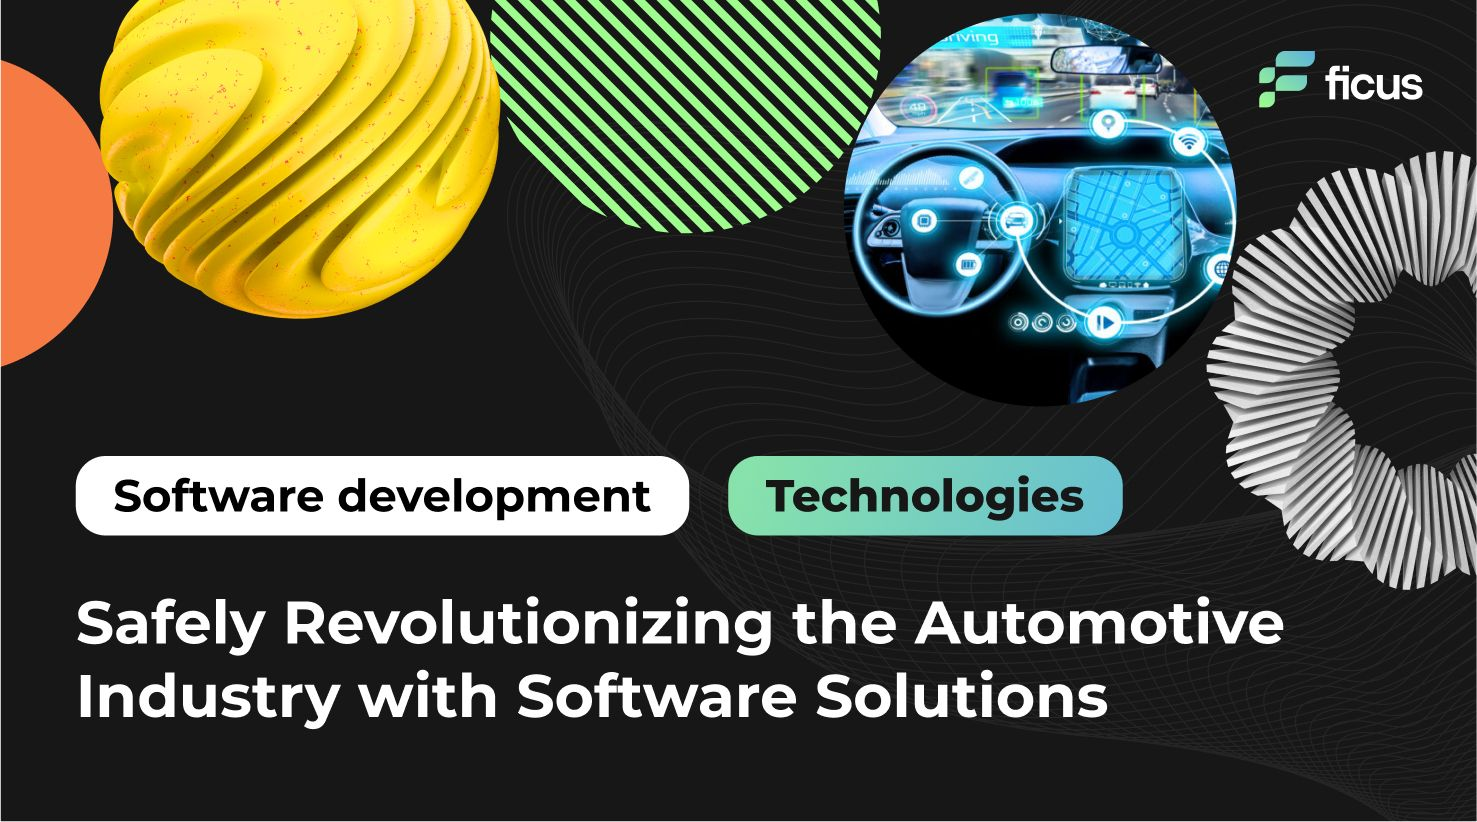 Safely Revolutionizing the Automotive Industry with Software Solutions